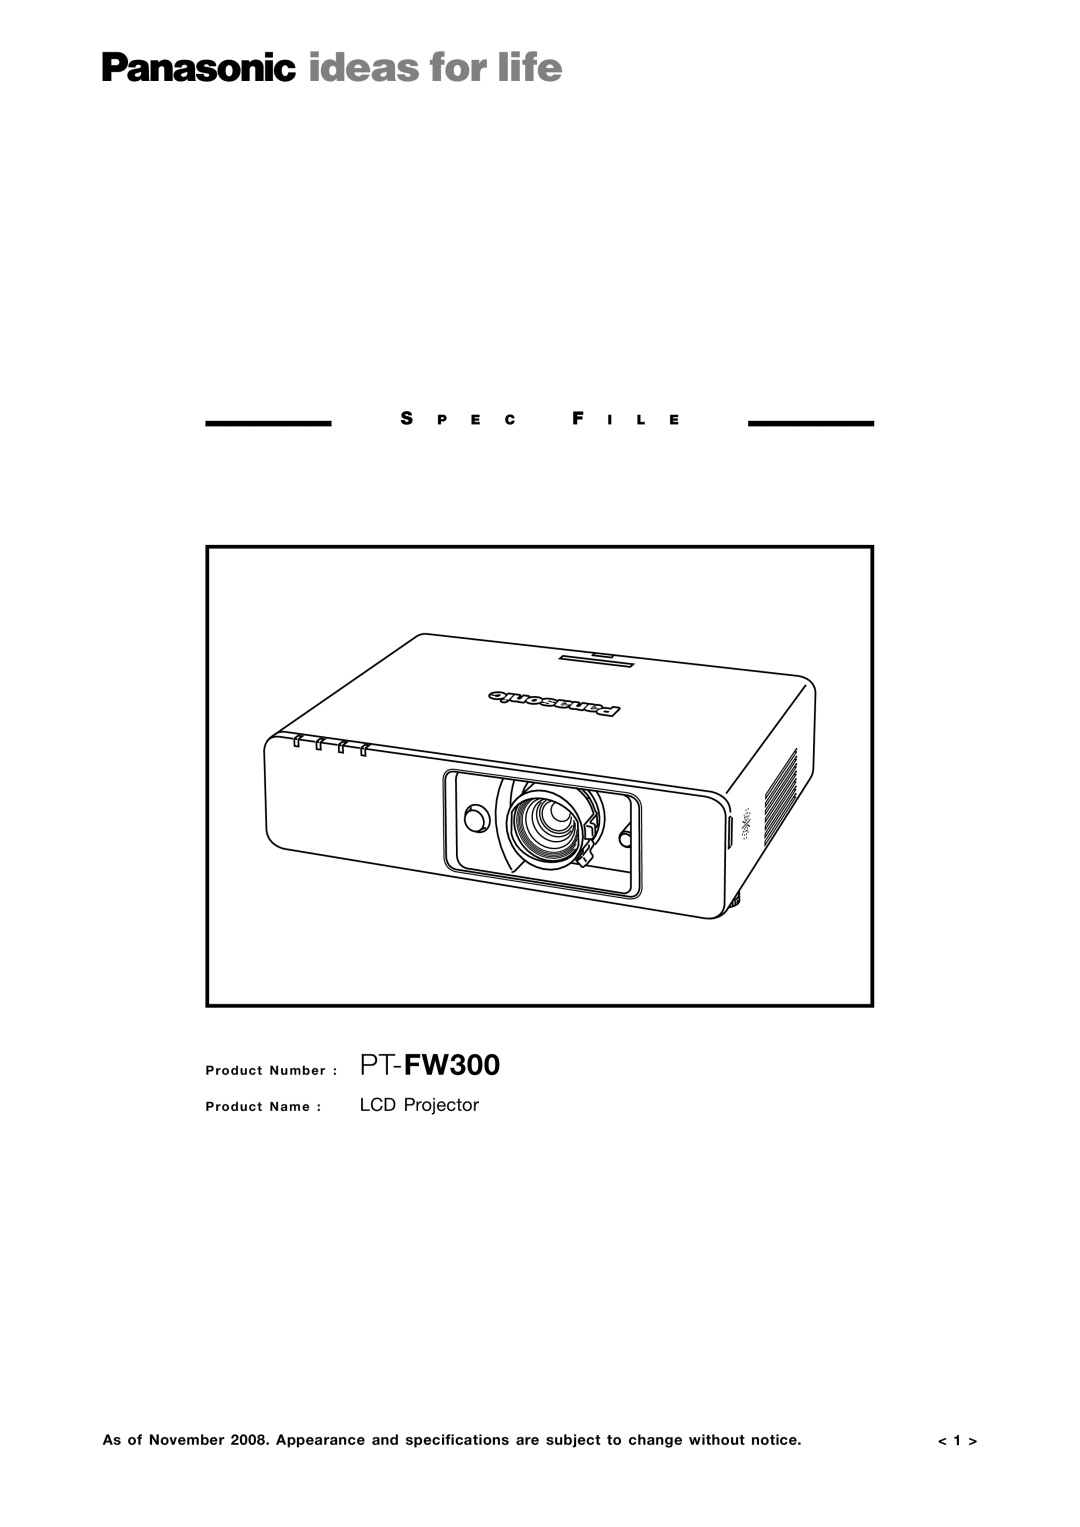 Panasonic PT-FW300 specifications LCD Projector, Product Number Product Name 